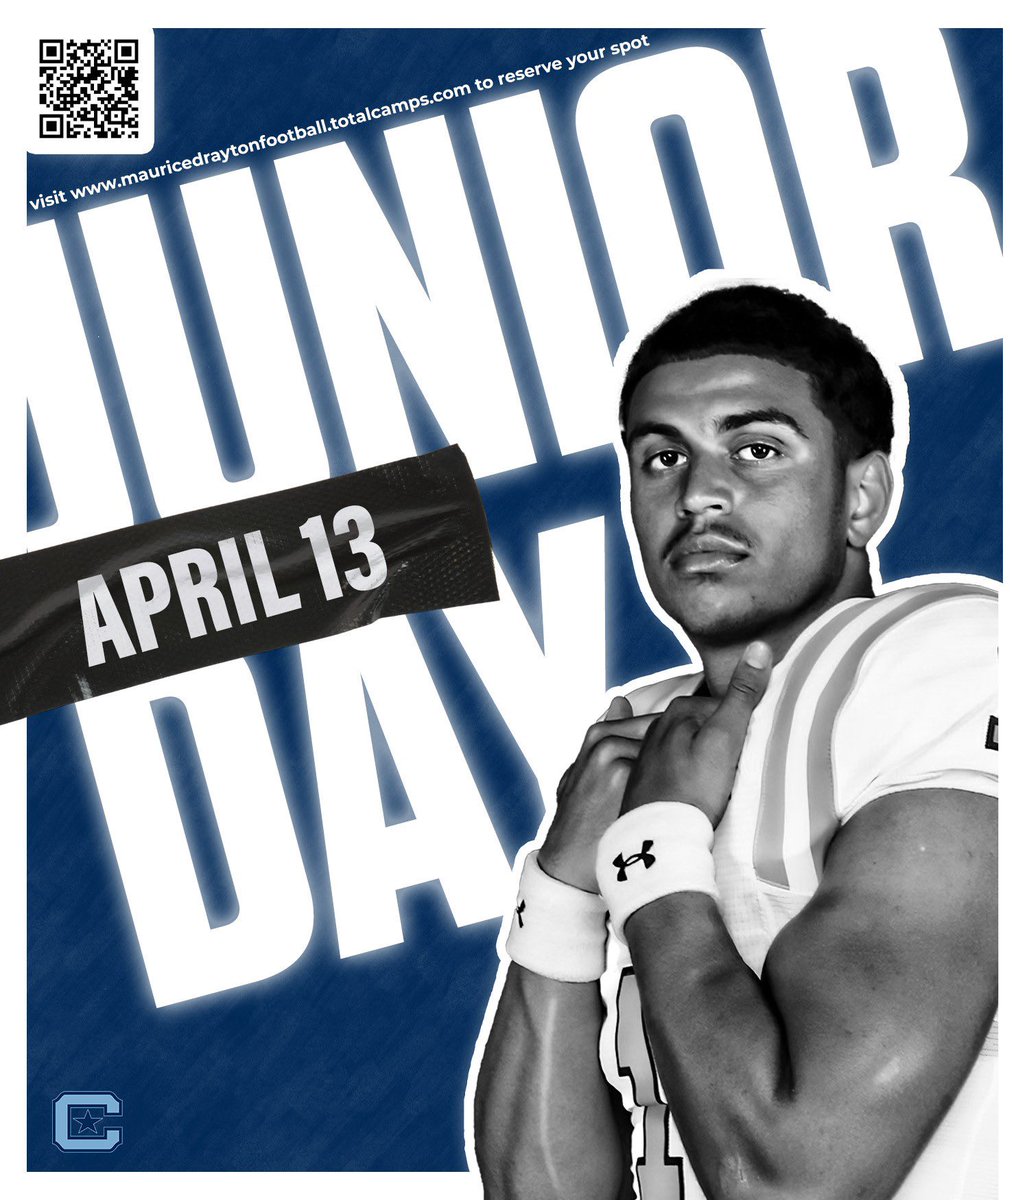 I will be at the Citadel on April 13th for their junior day and spring game! @JacksonEskierka @CitadelFootball